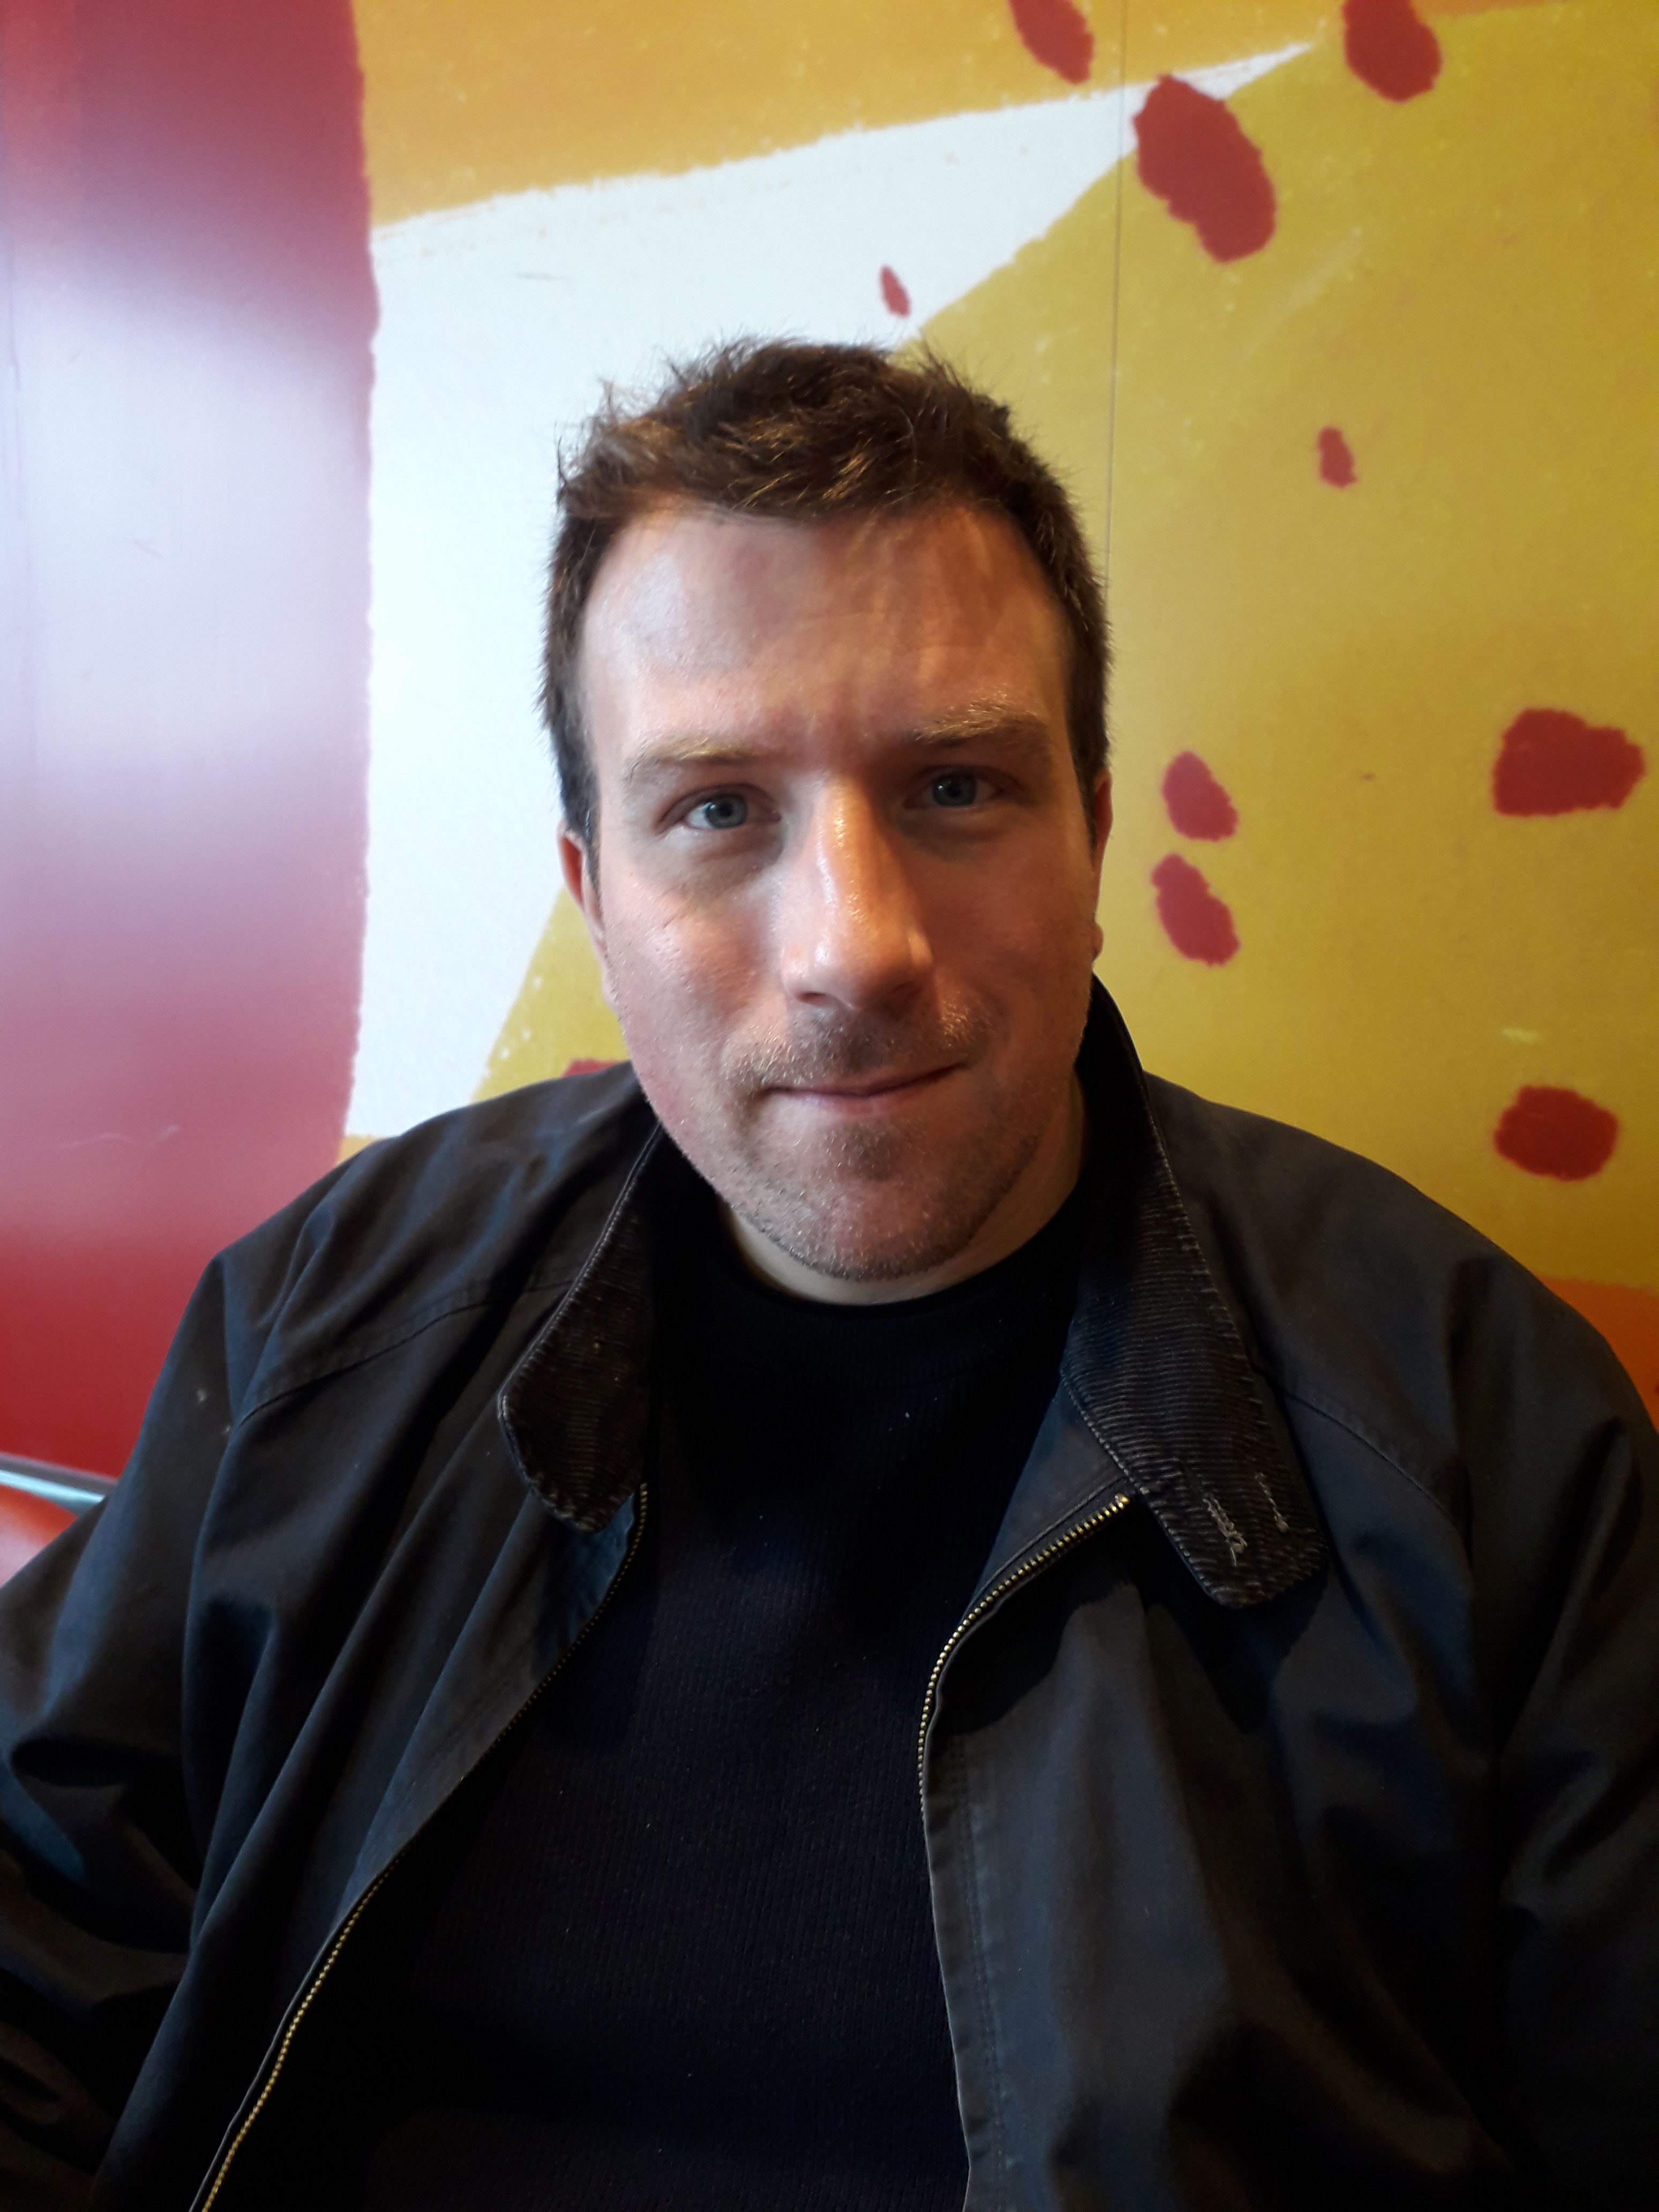 A photo of a man wearing a black t-shirt and black jacket. he is stood in front of a red and yellow wall